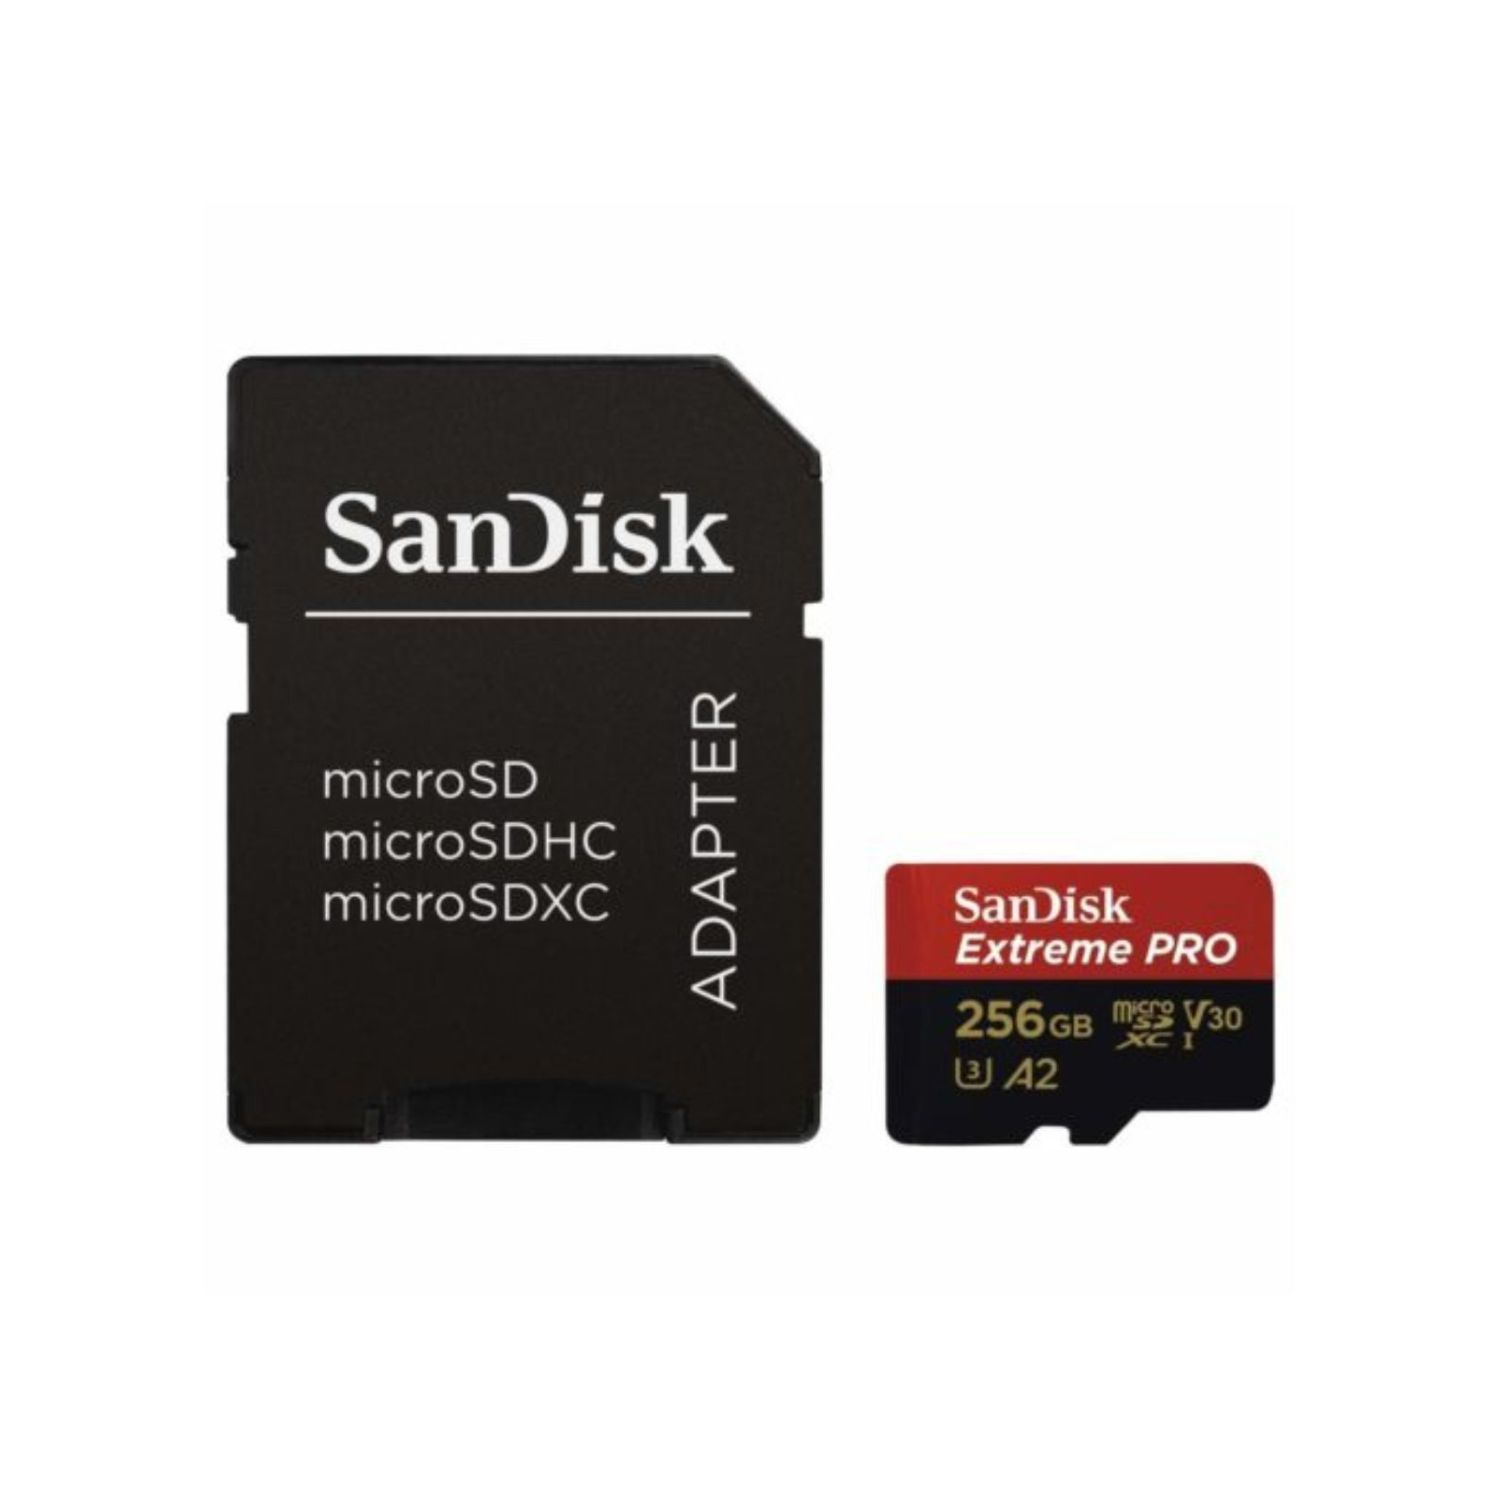 SanDisk 256GB MicroSD Extreme Pro Memory Card (200mb/s)